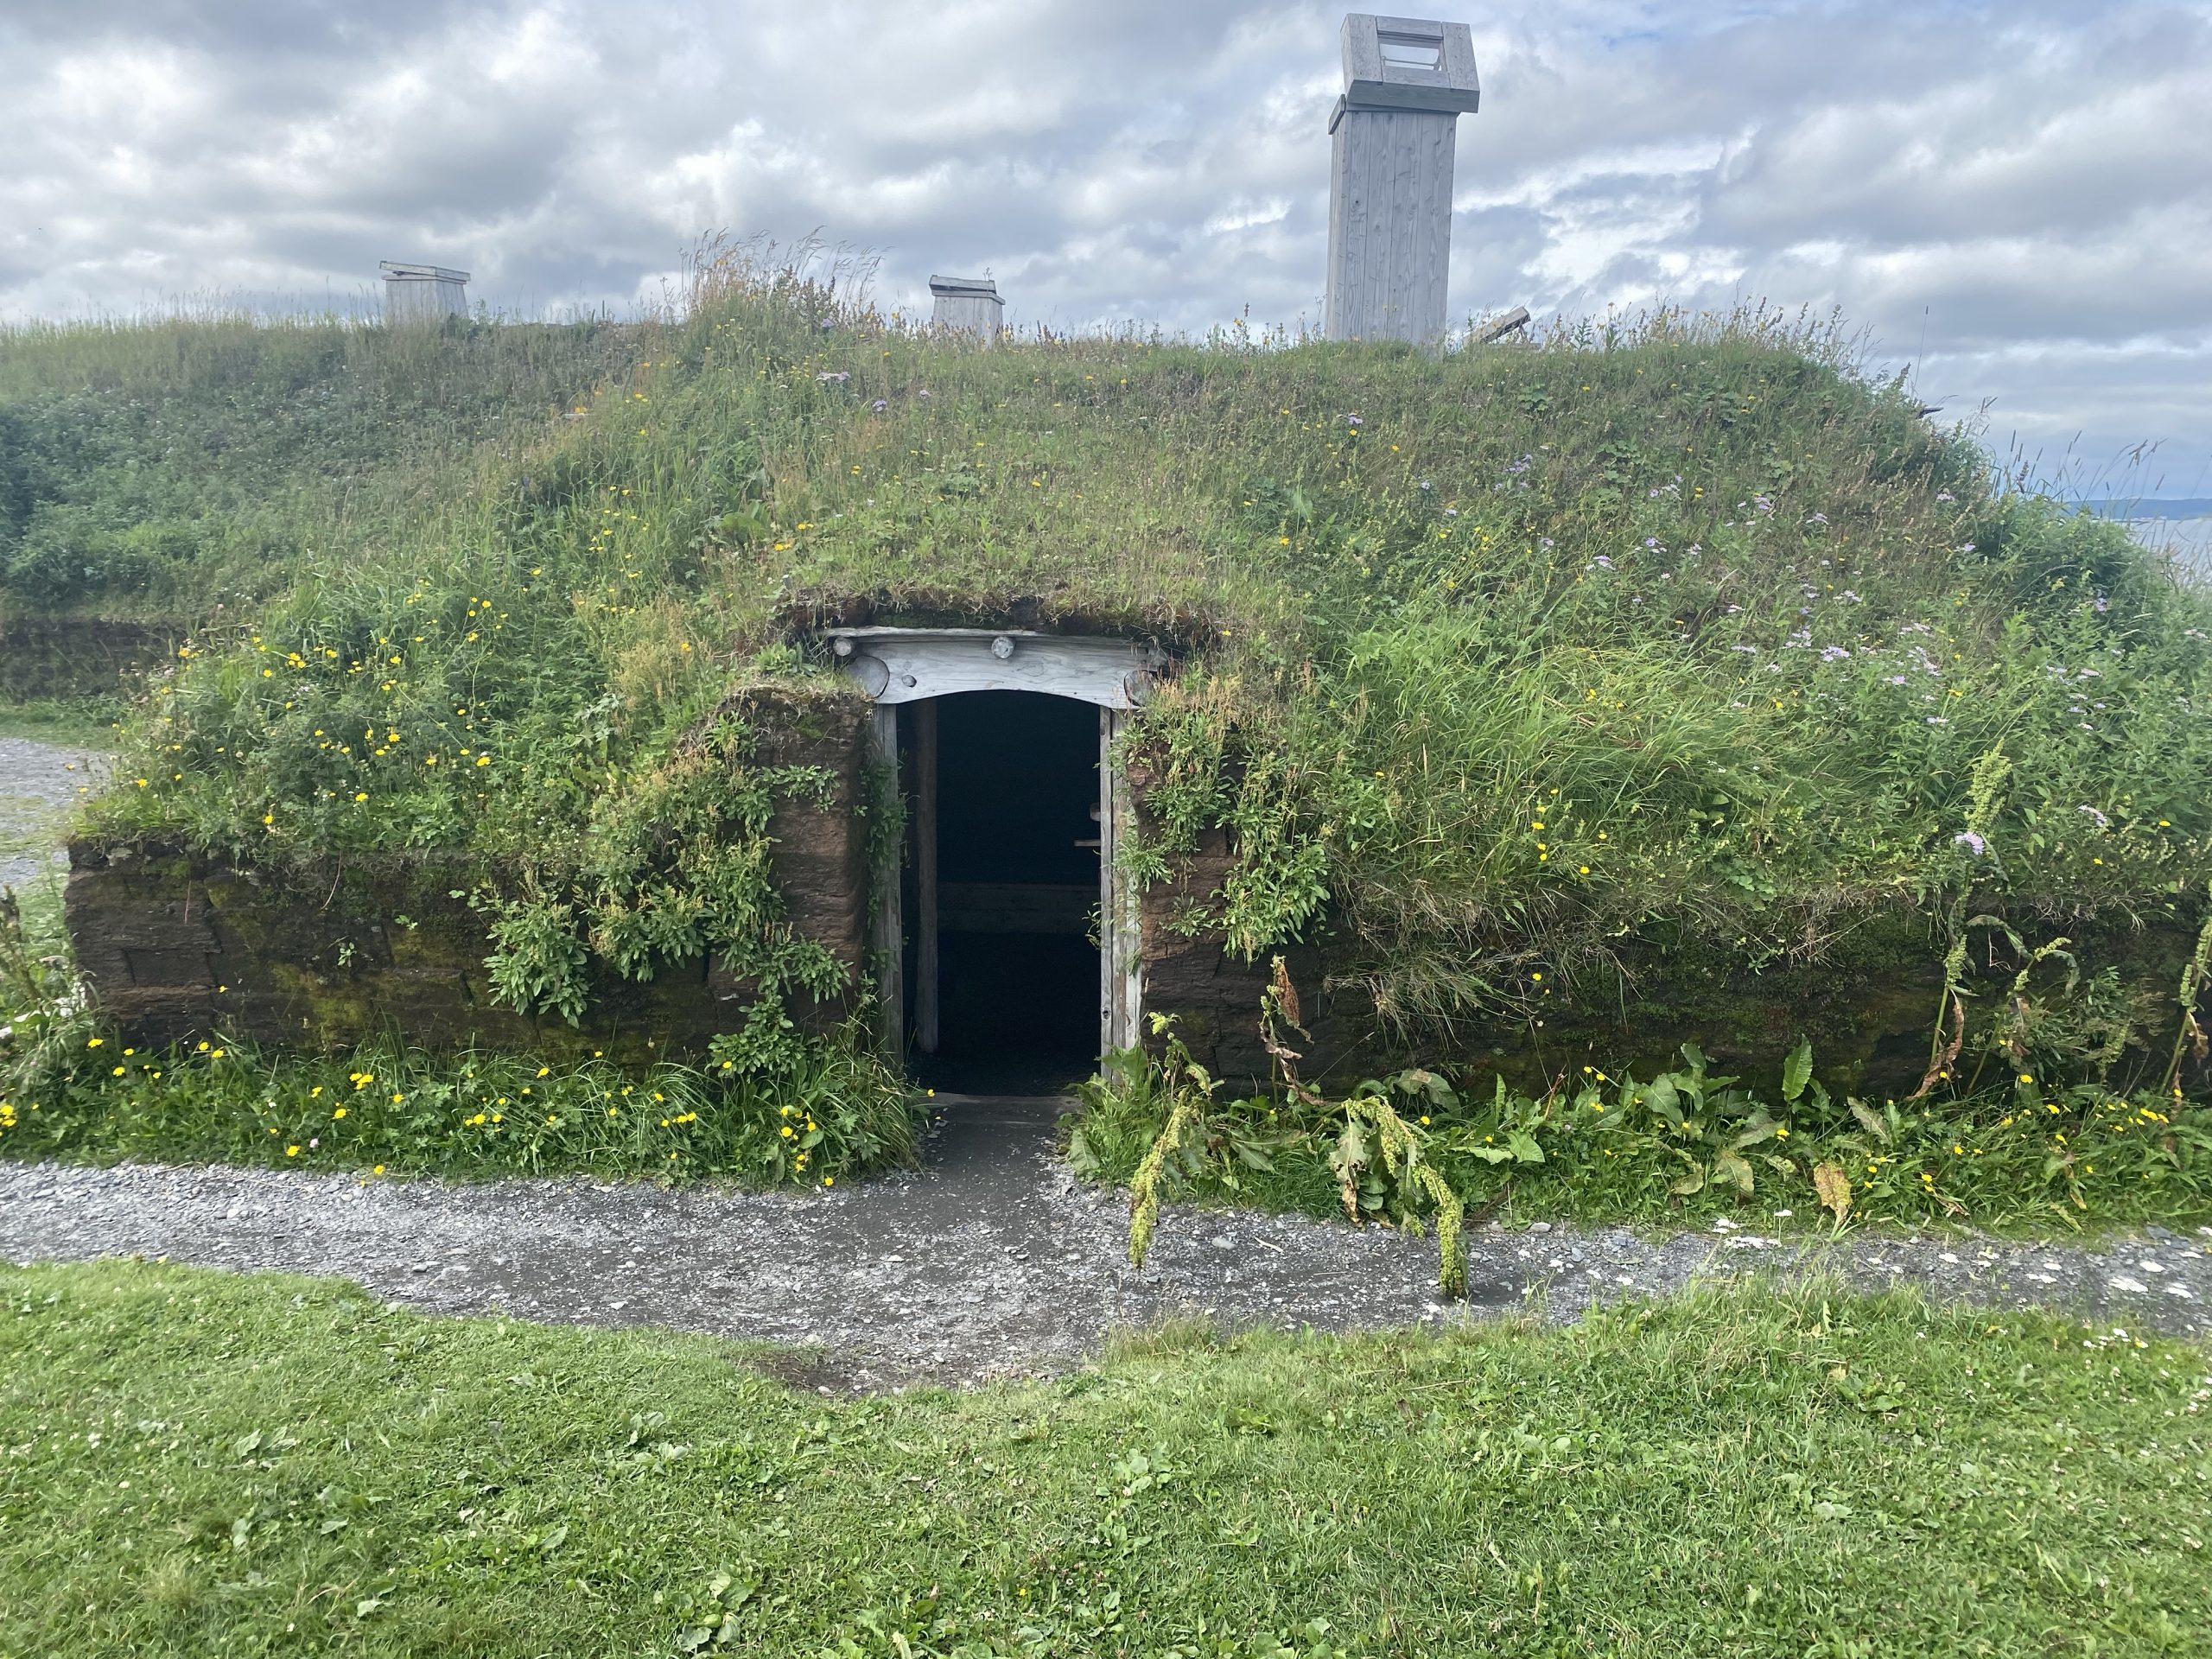 A re-creation of a smaller 1,000 year old Norse sod house.